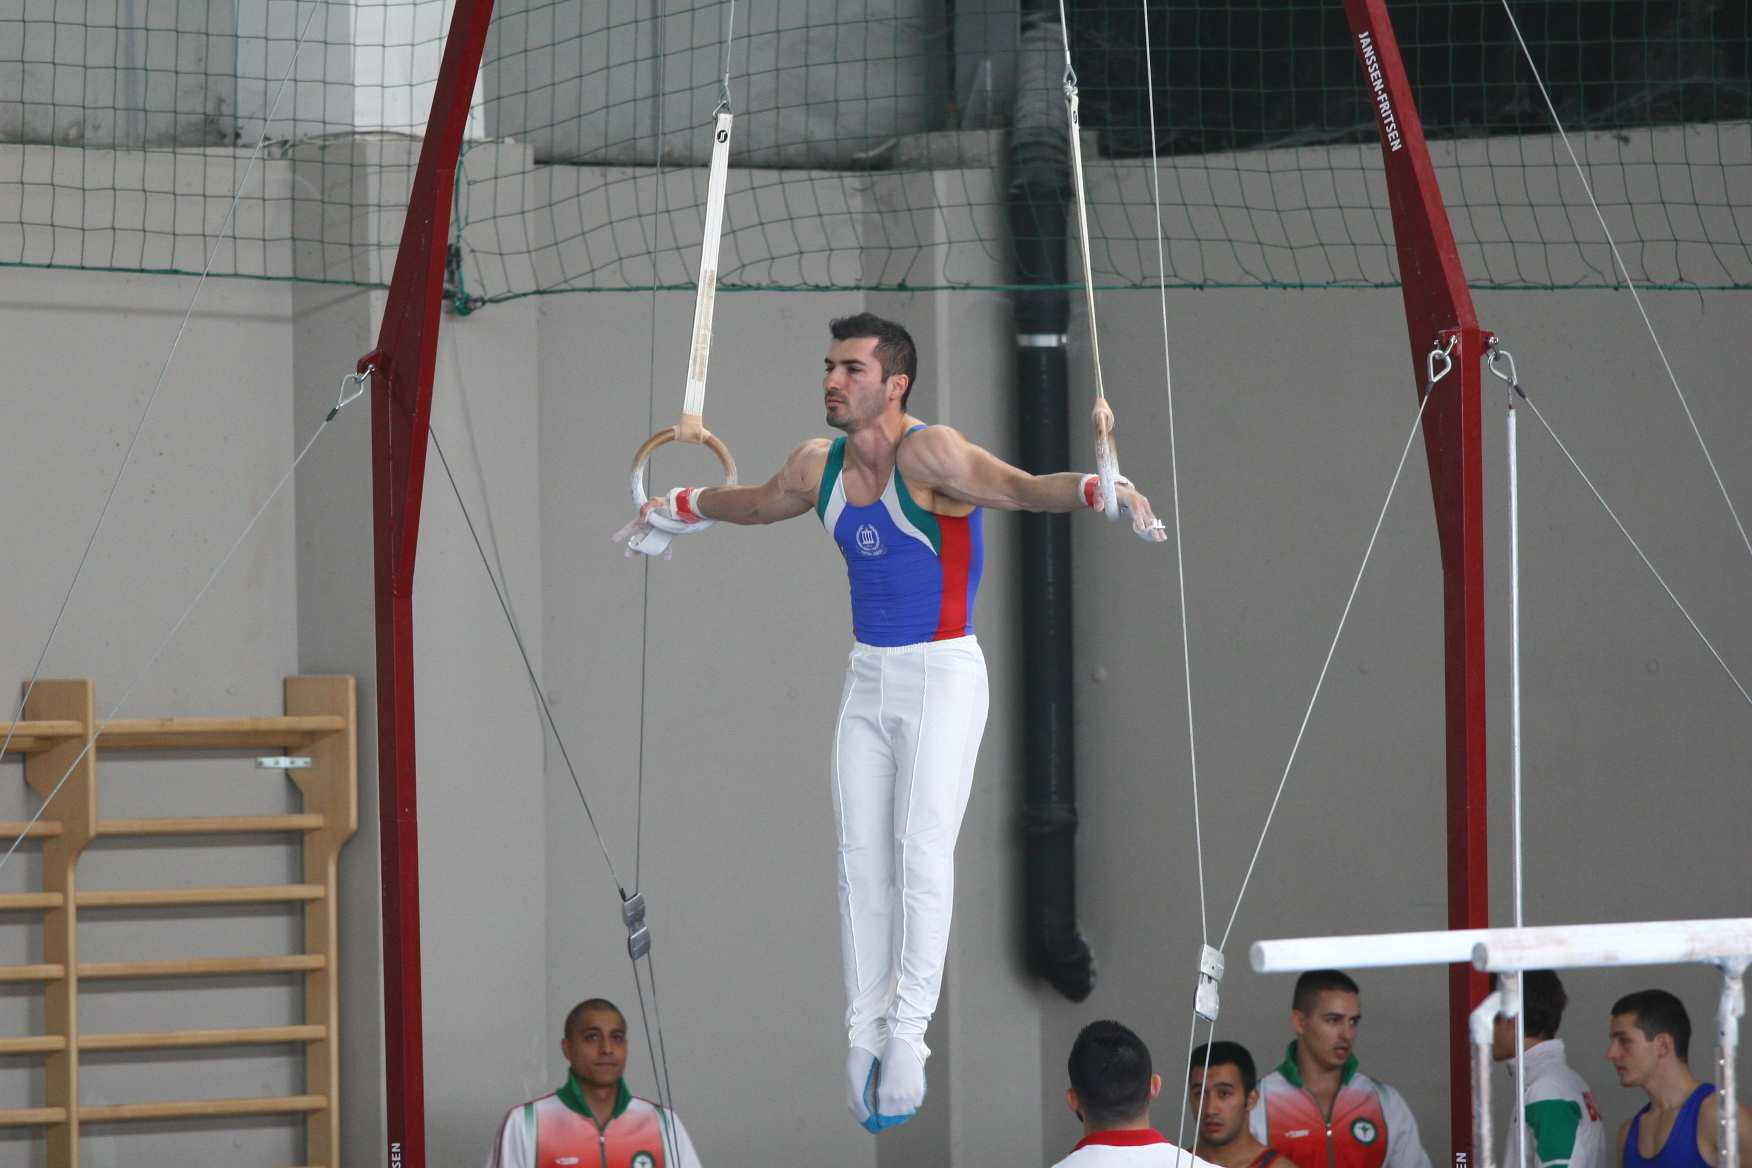 Gymnastics Iron Cross with open hands on Rings